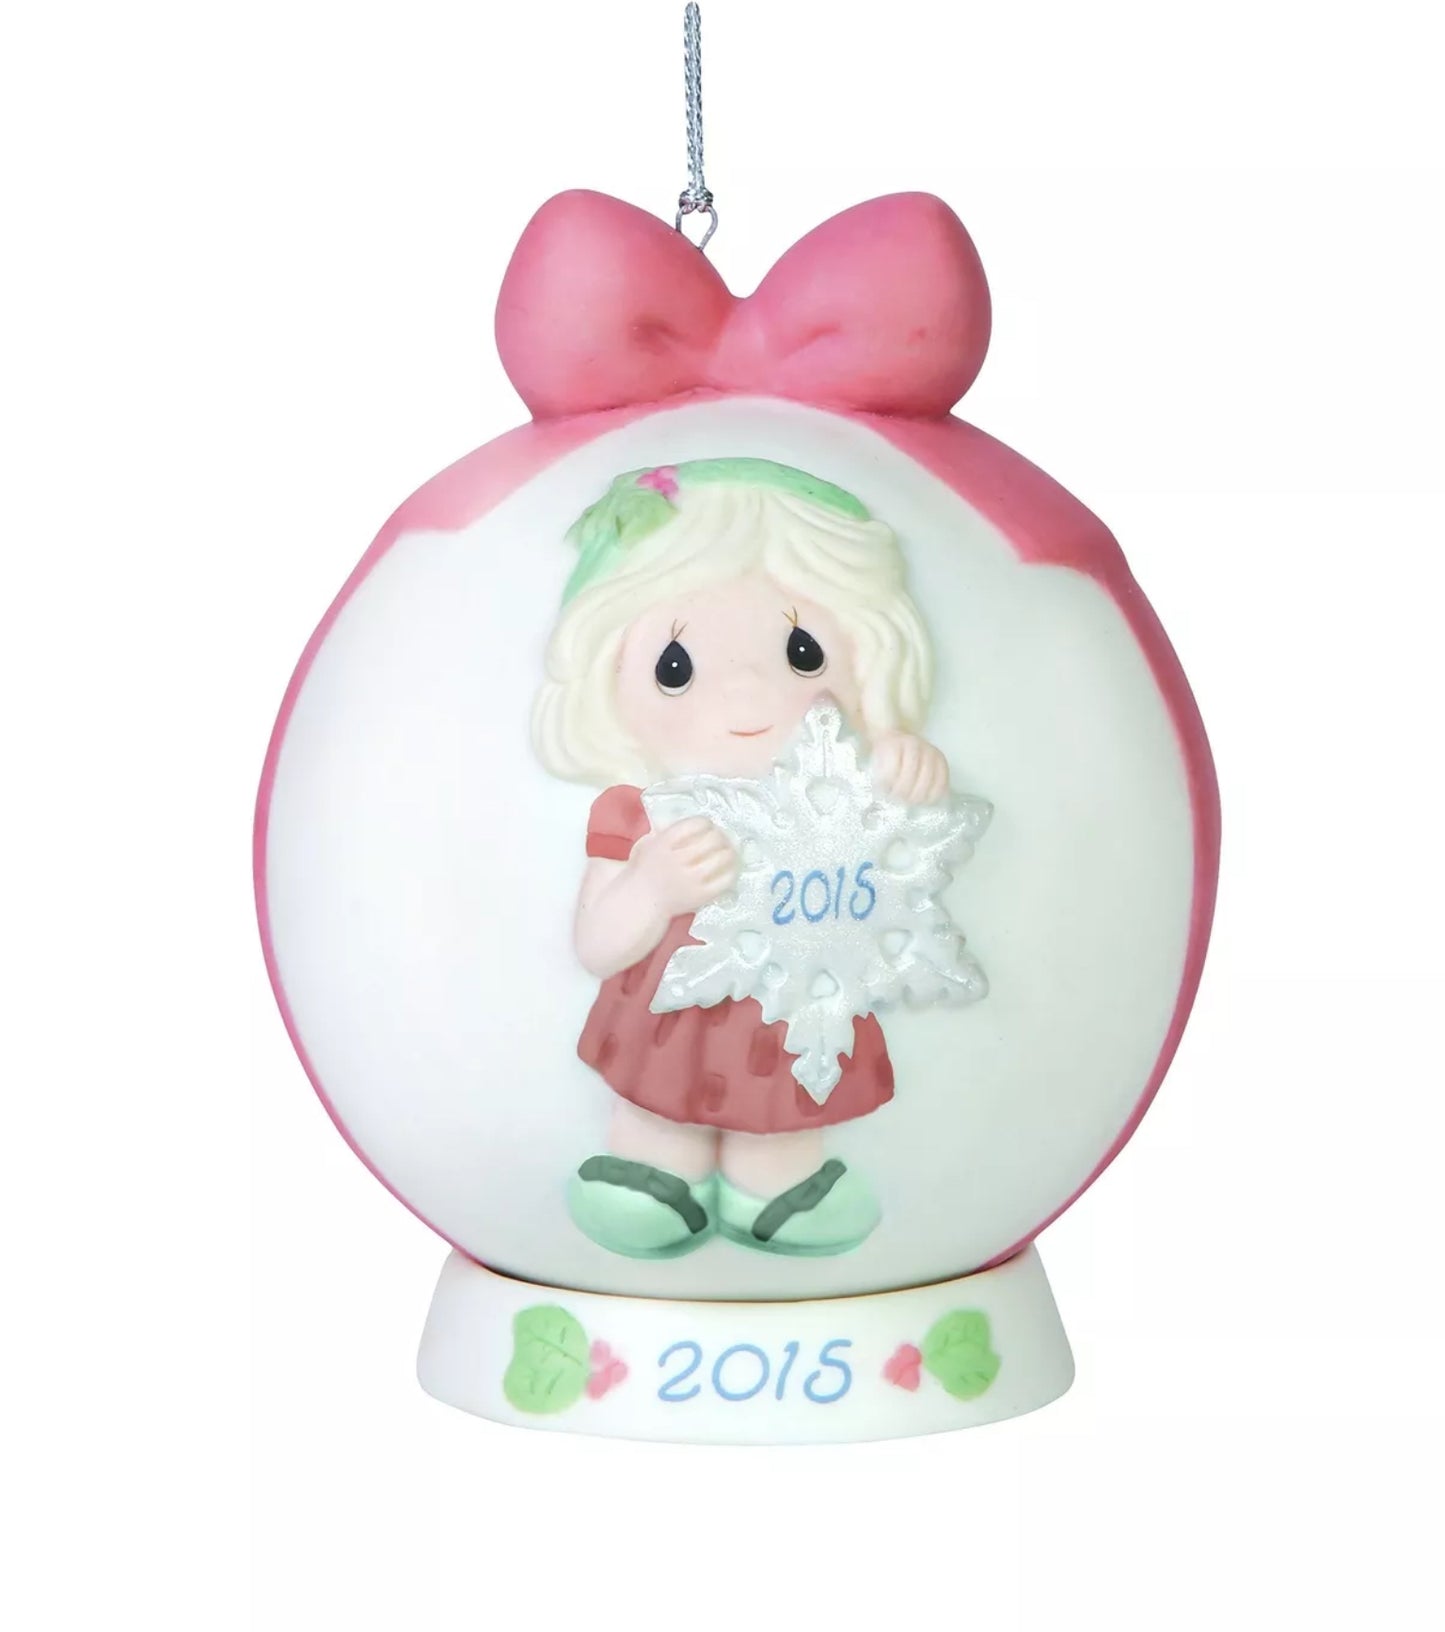 You Make The Season One Of A Kind - Dated Annual 2015 Precious Moment Ball Ornament